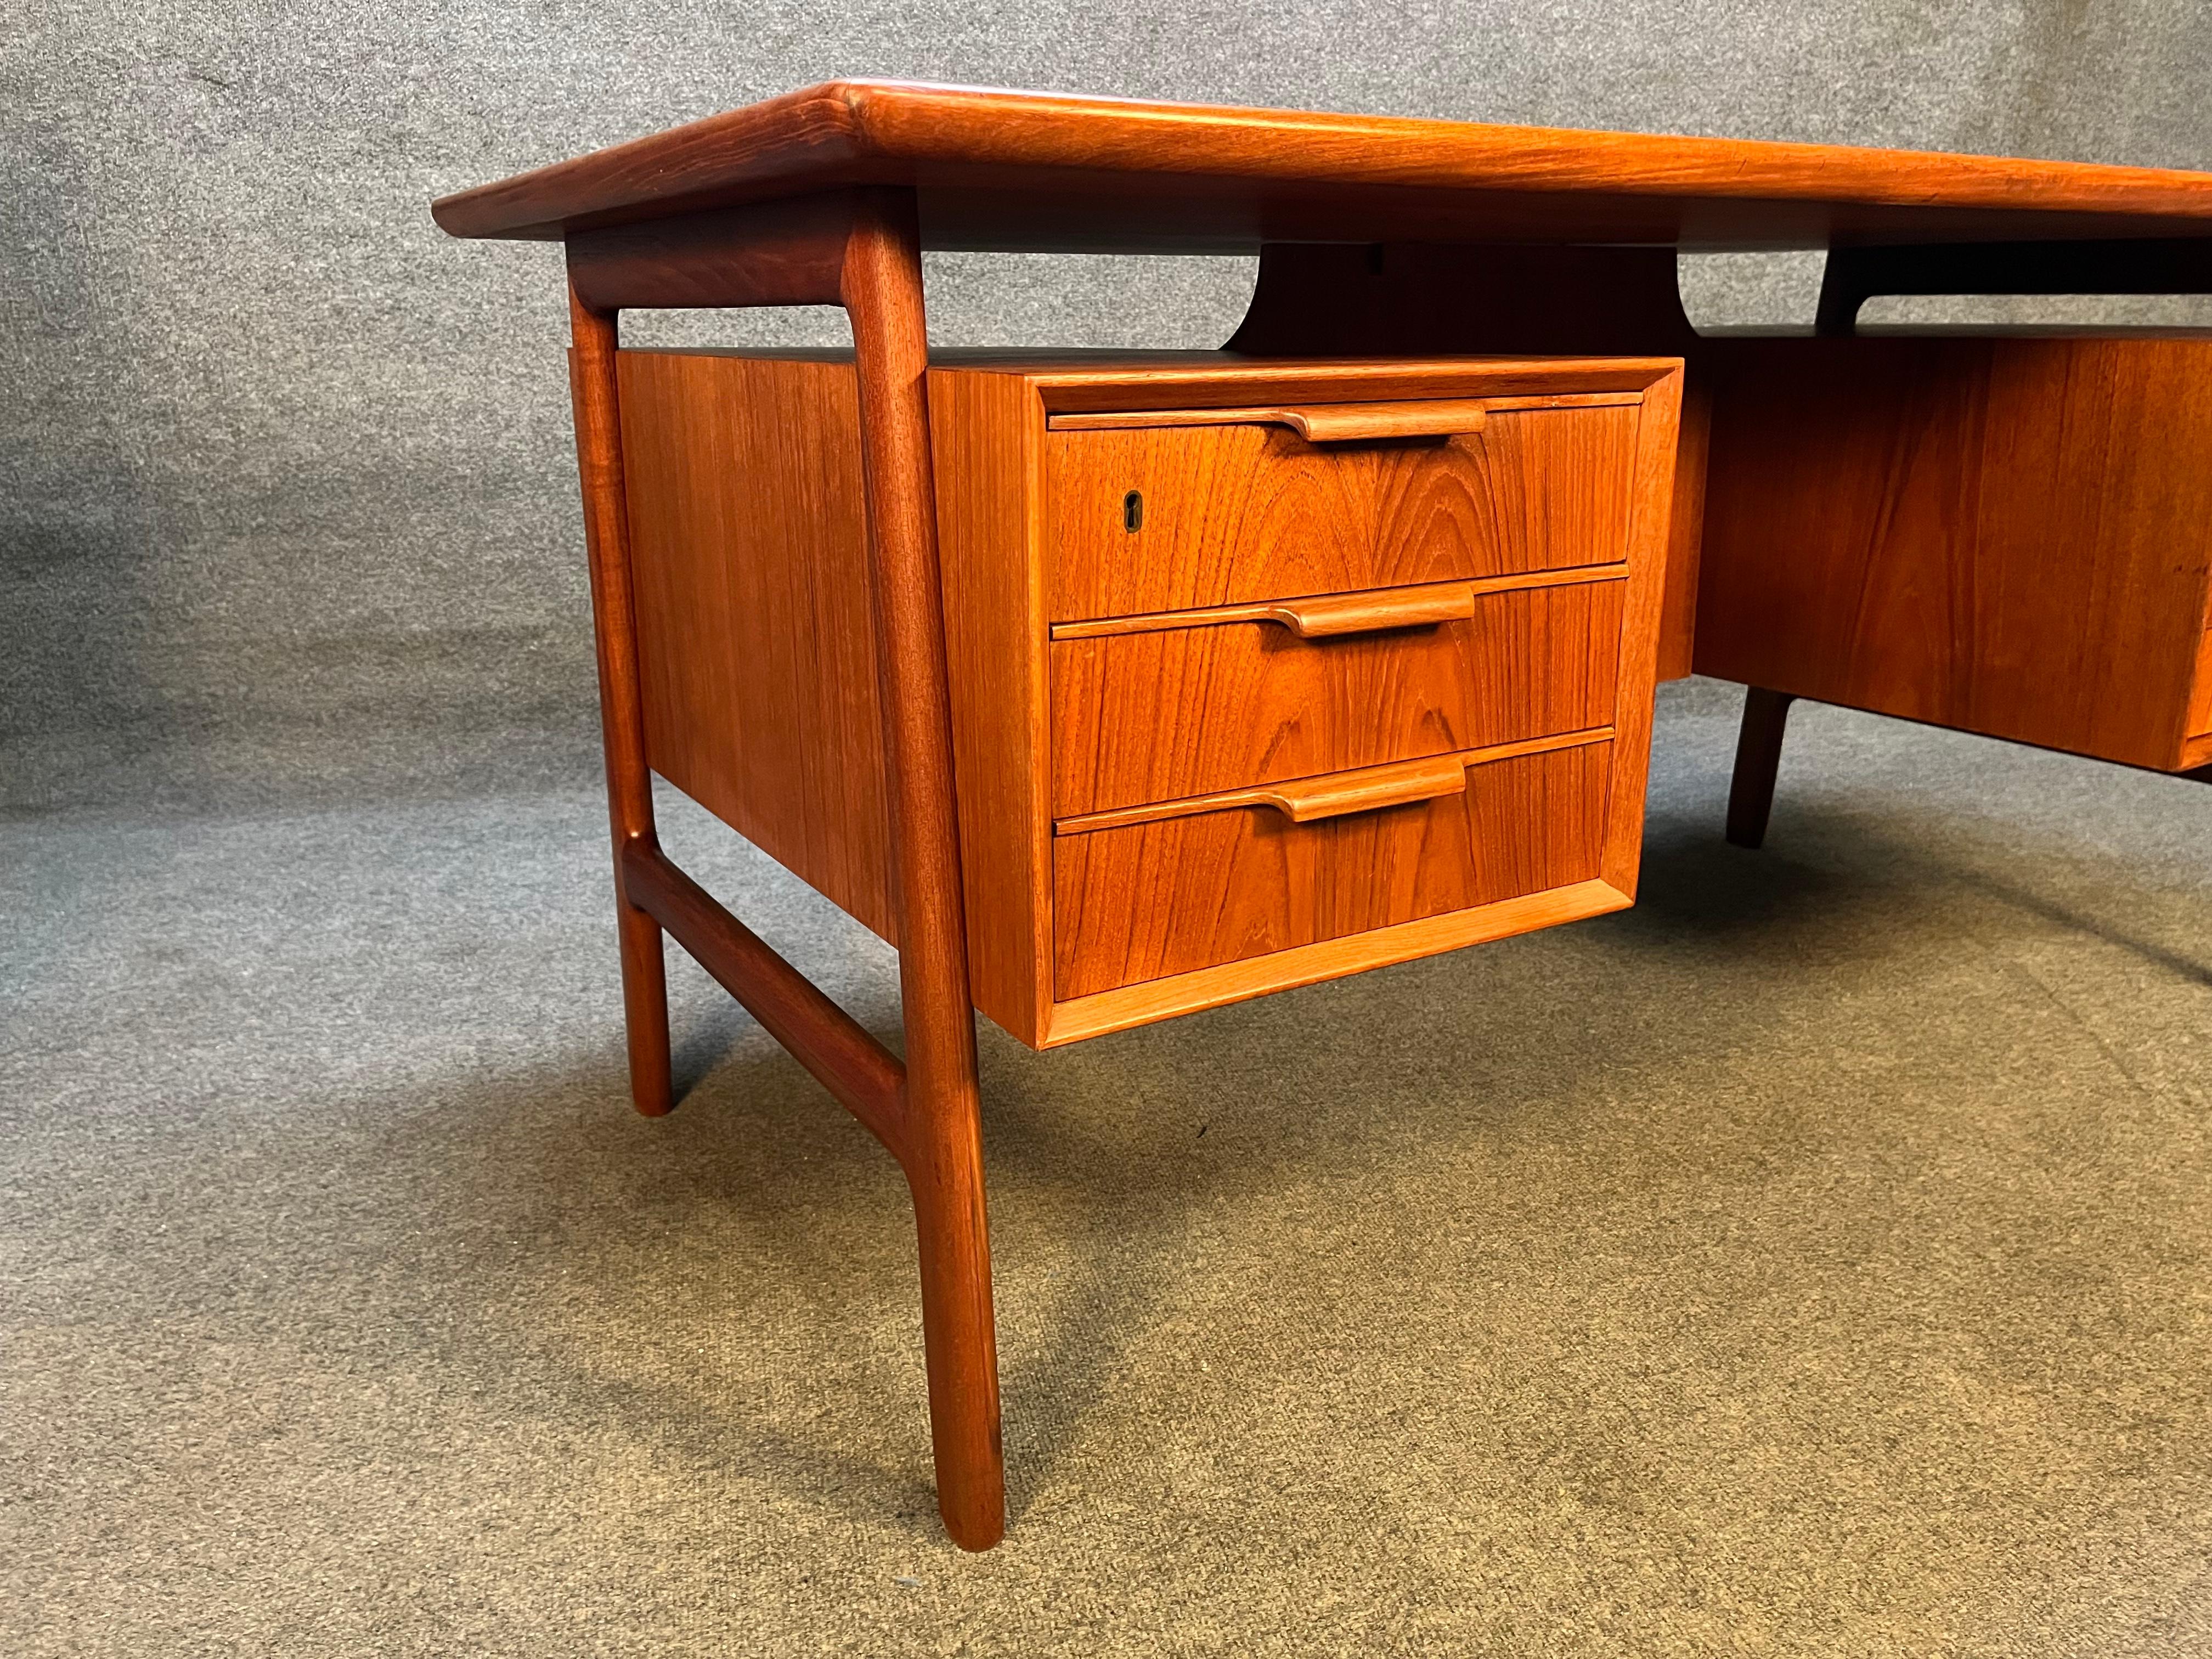 Here is the iconic Model 75 desk designed by Gunni Omann and manufactured by Omann Jun Mobelfabrik. This stunning 1960's Scandinavian modern desk in teak wood features a sculpted frame-legs supporting seamlessly two floating banks of drawer on the